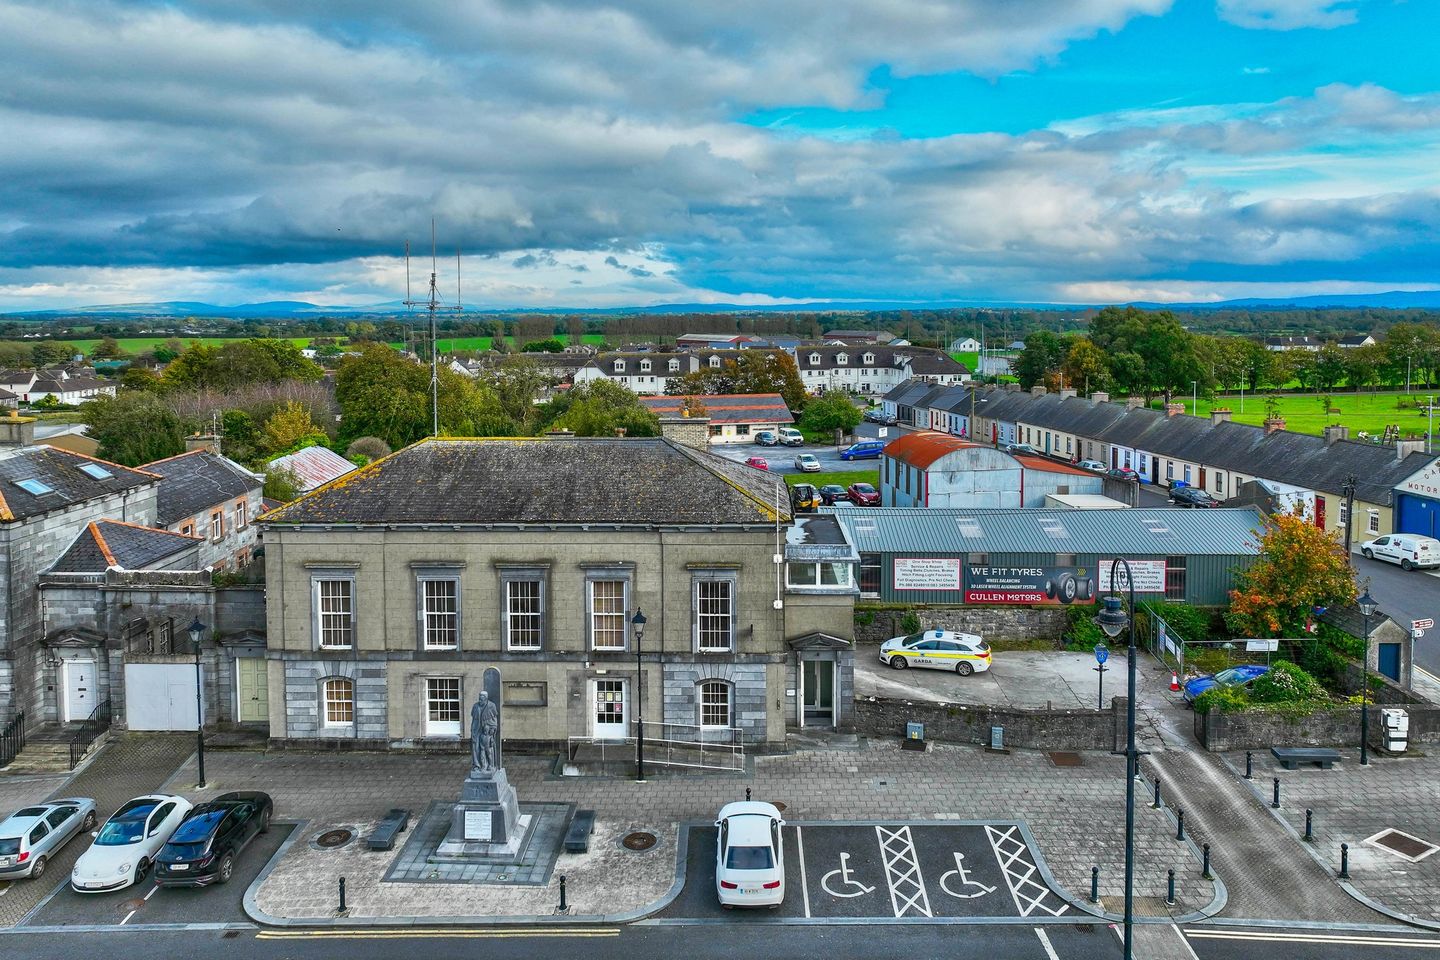 The Old Courthouse, Green Street, Callan, Co. Kilkenny